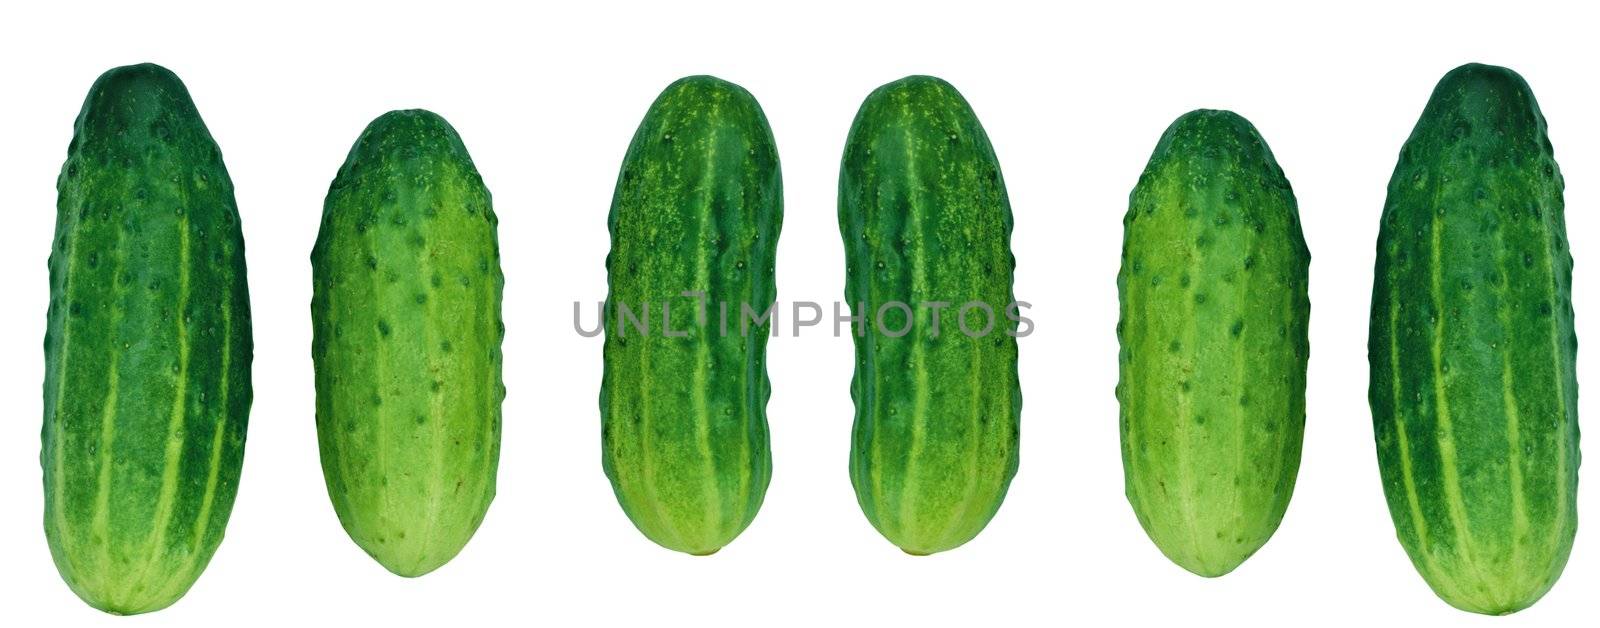 Cucumber on White Background by ozaiachin